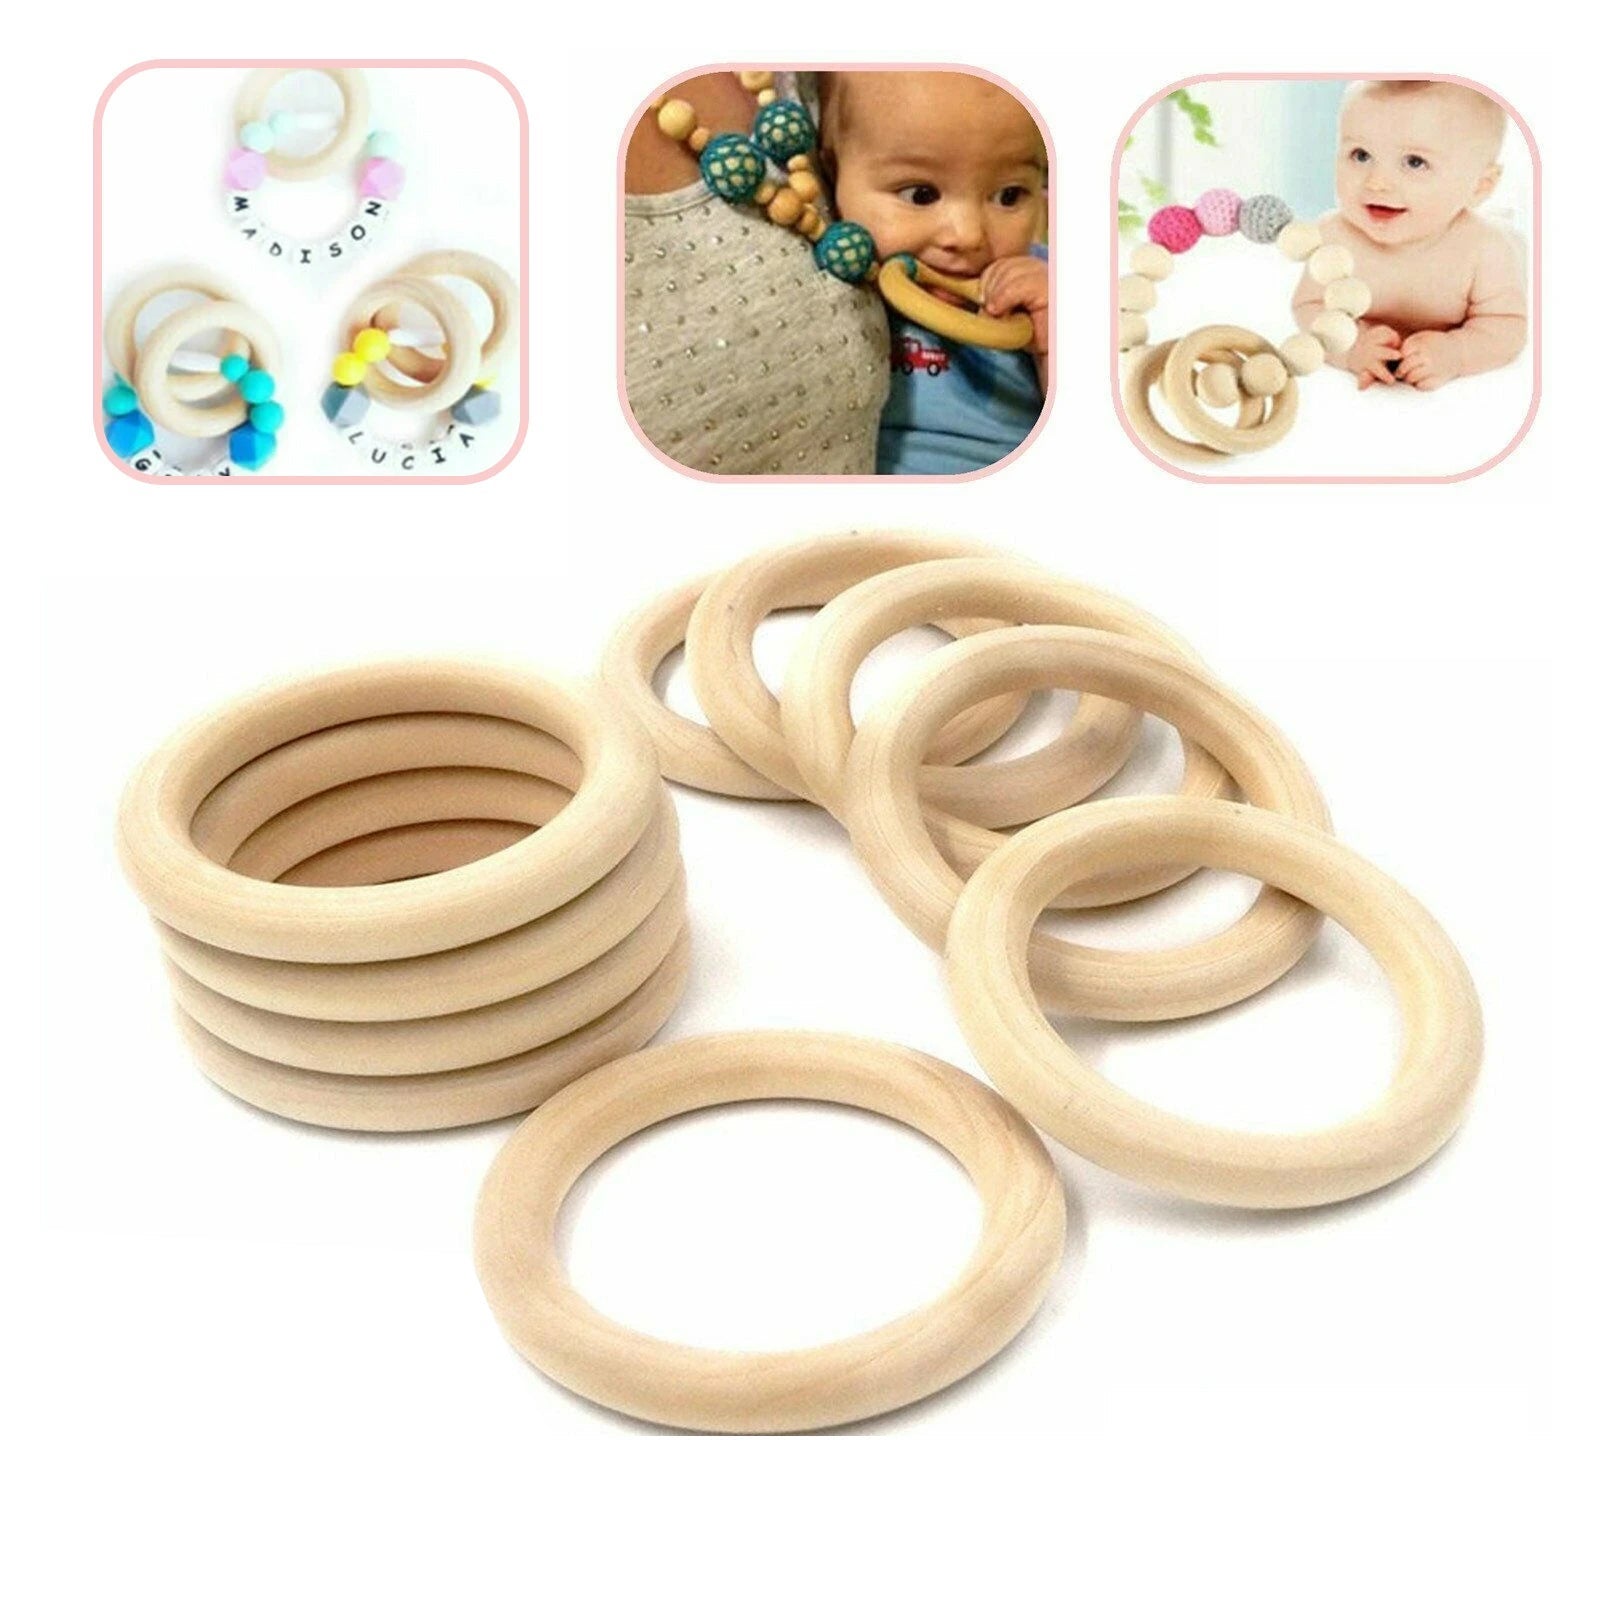 20X Baby Newborn Natural Round Wood Teething Ring Wooden Teether Toy DIY Gift AU 